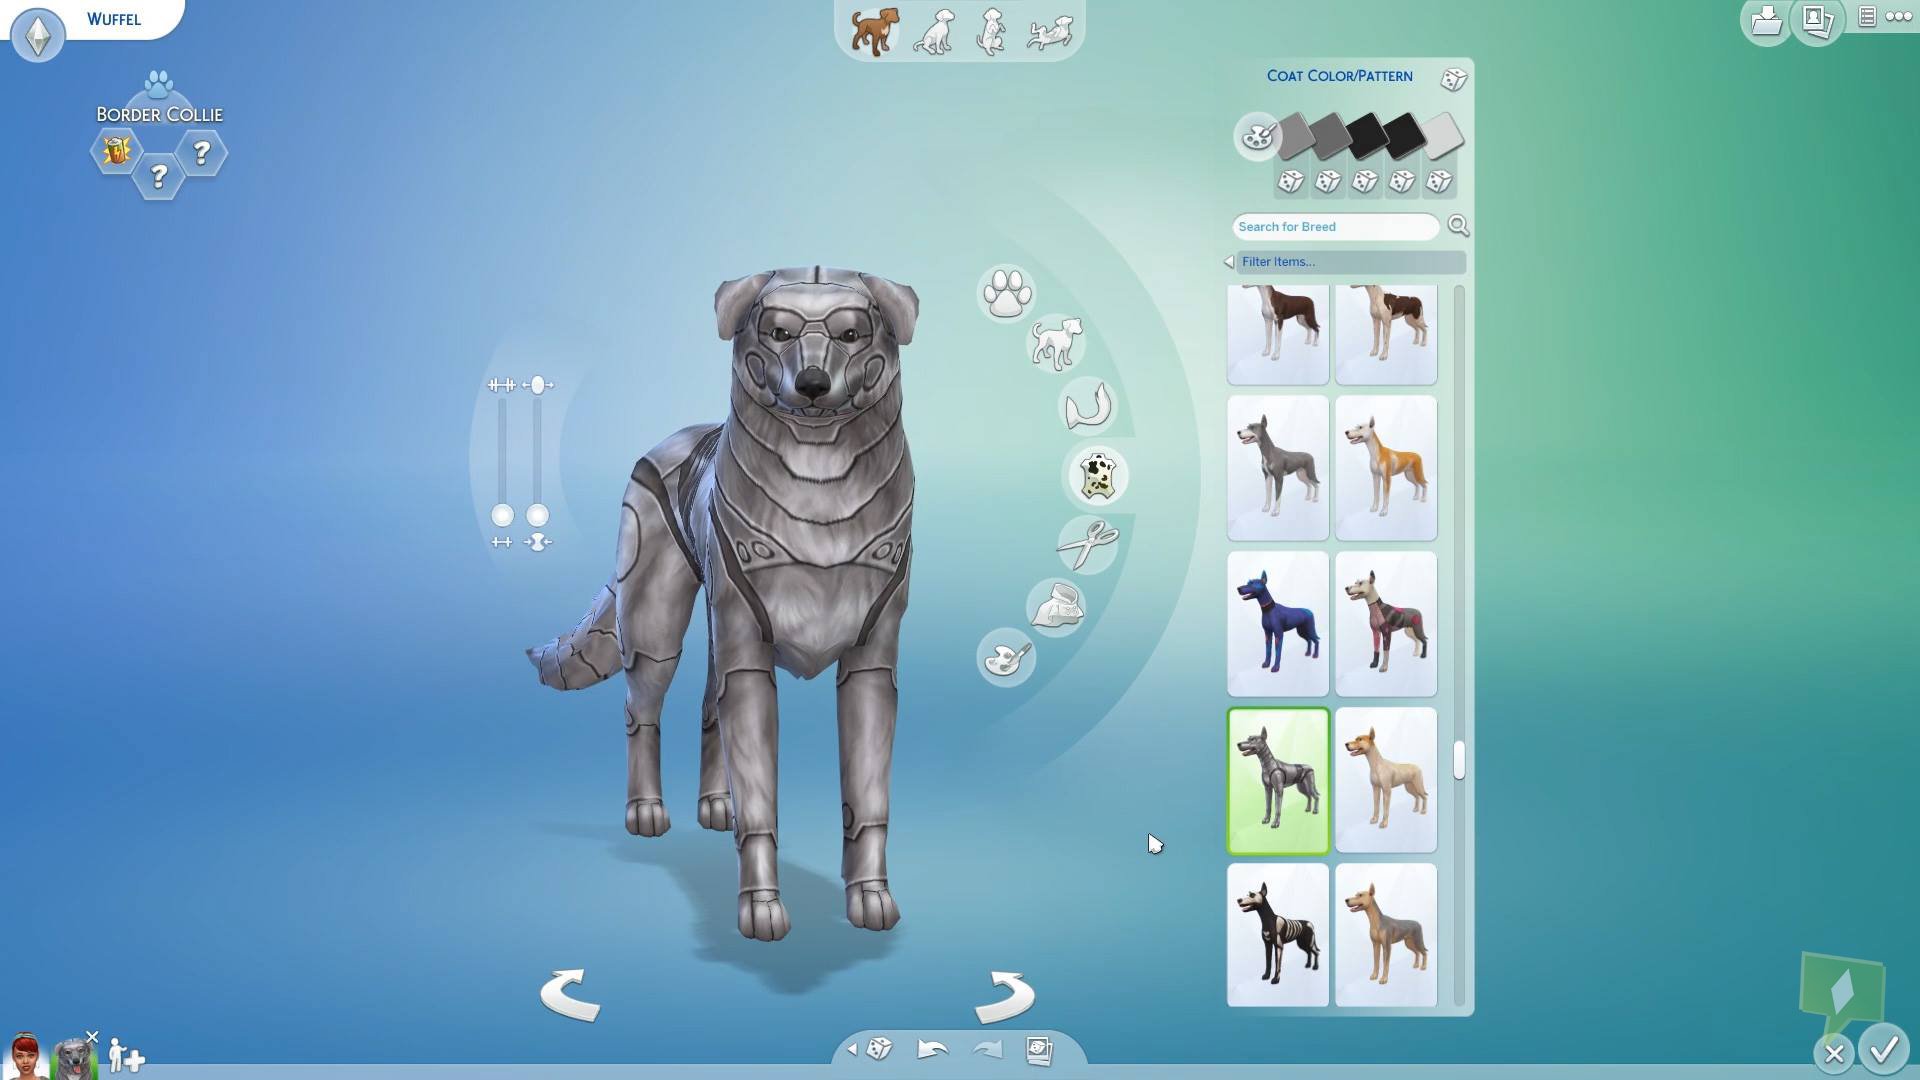 sims 4 cats a dogs free download